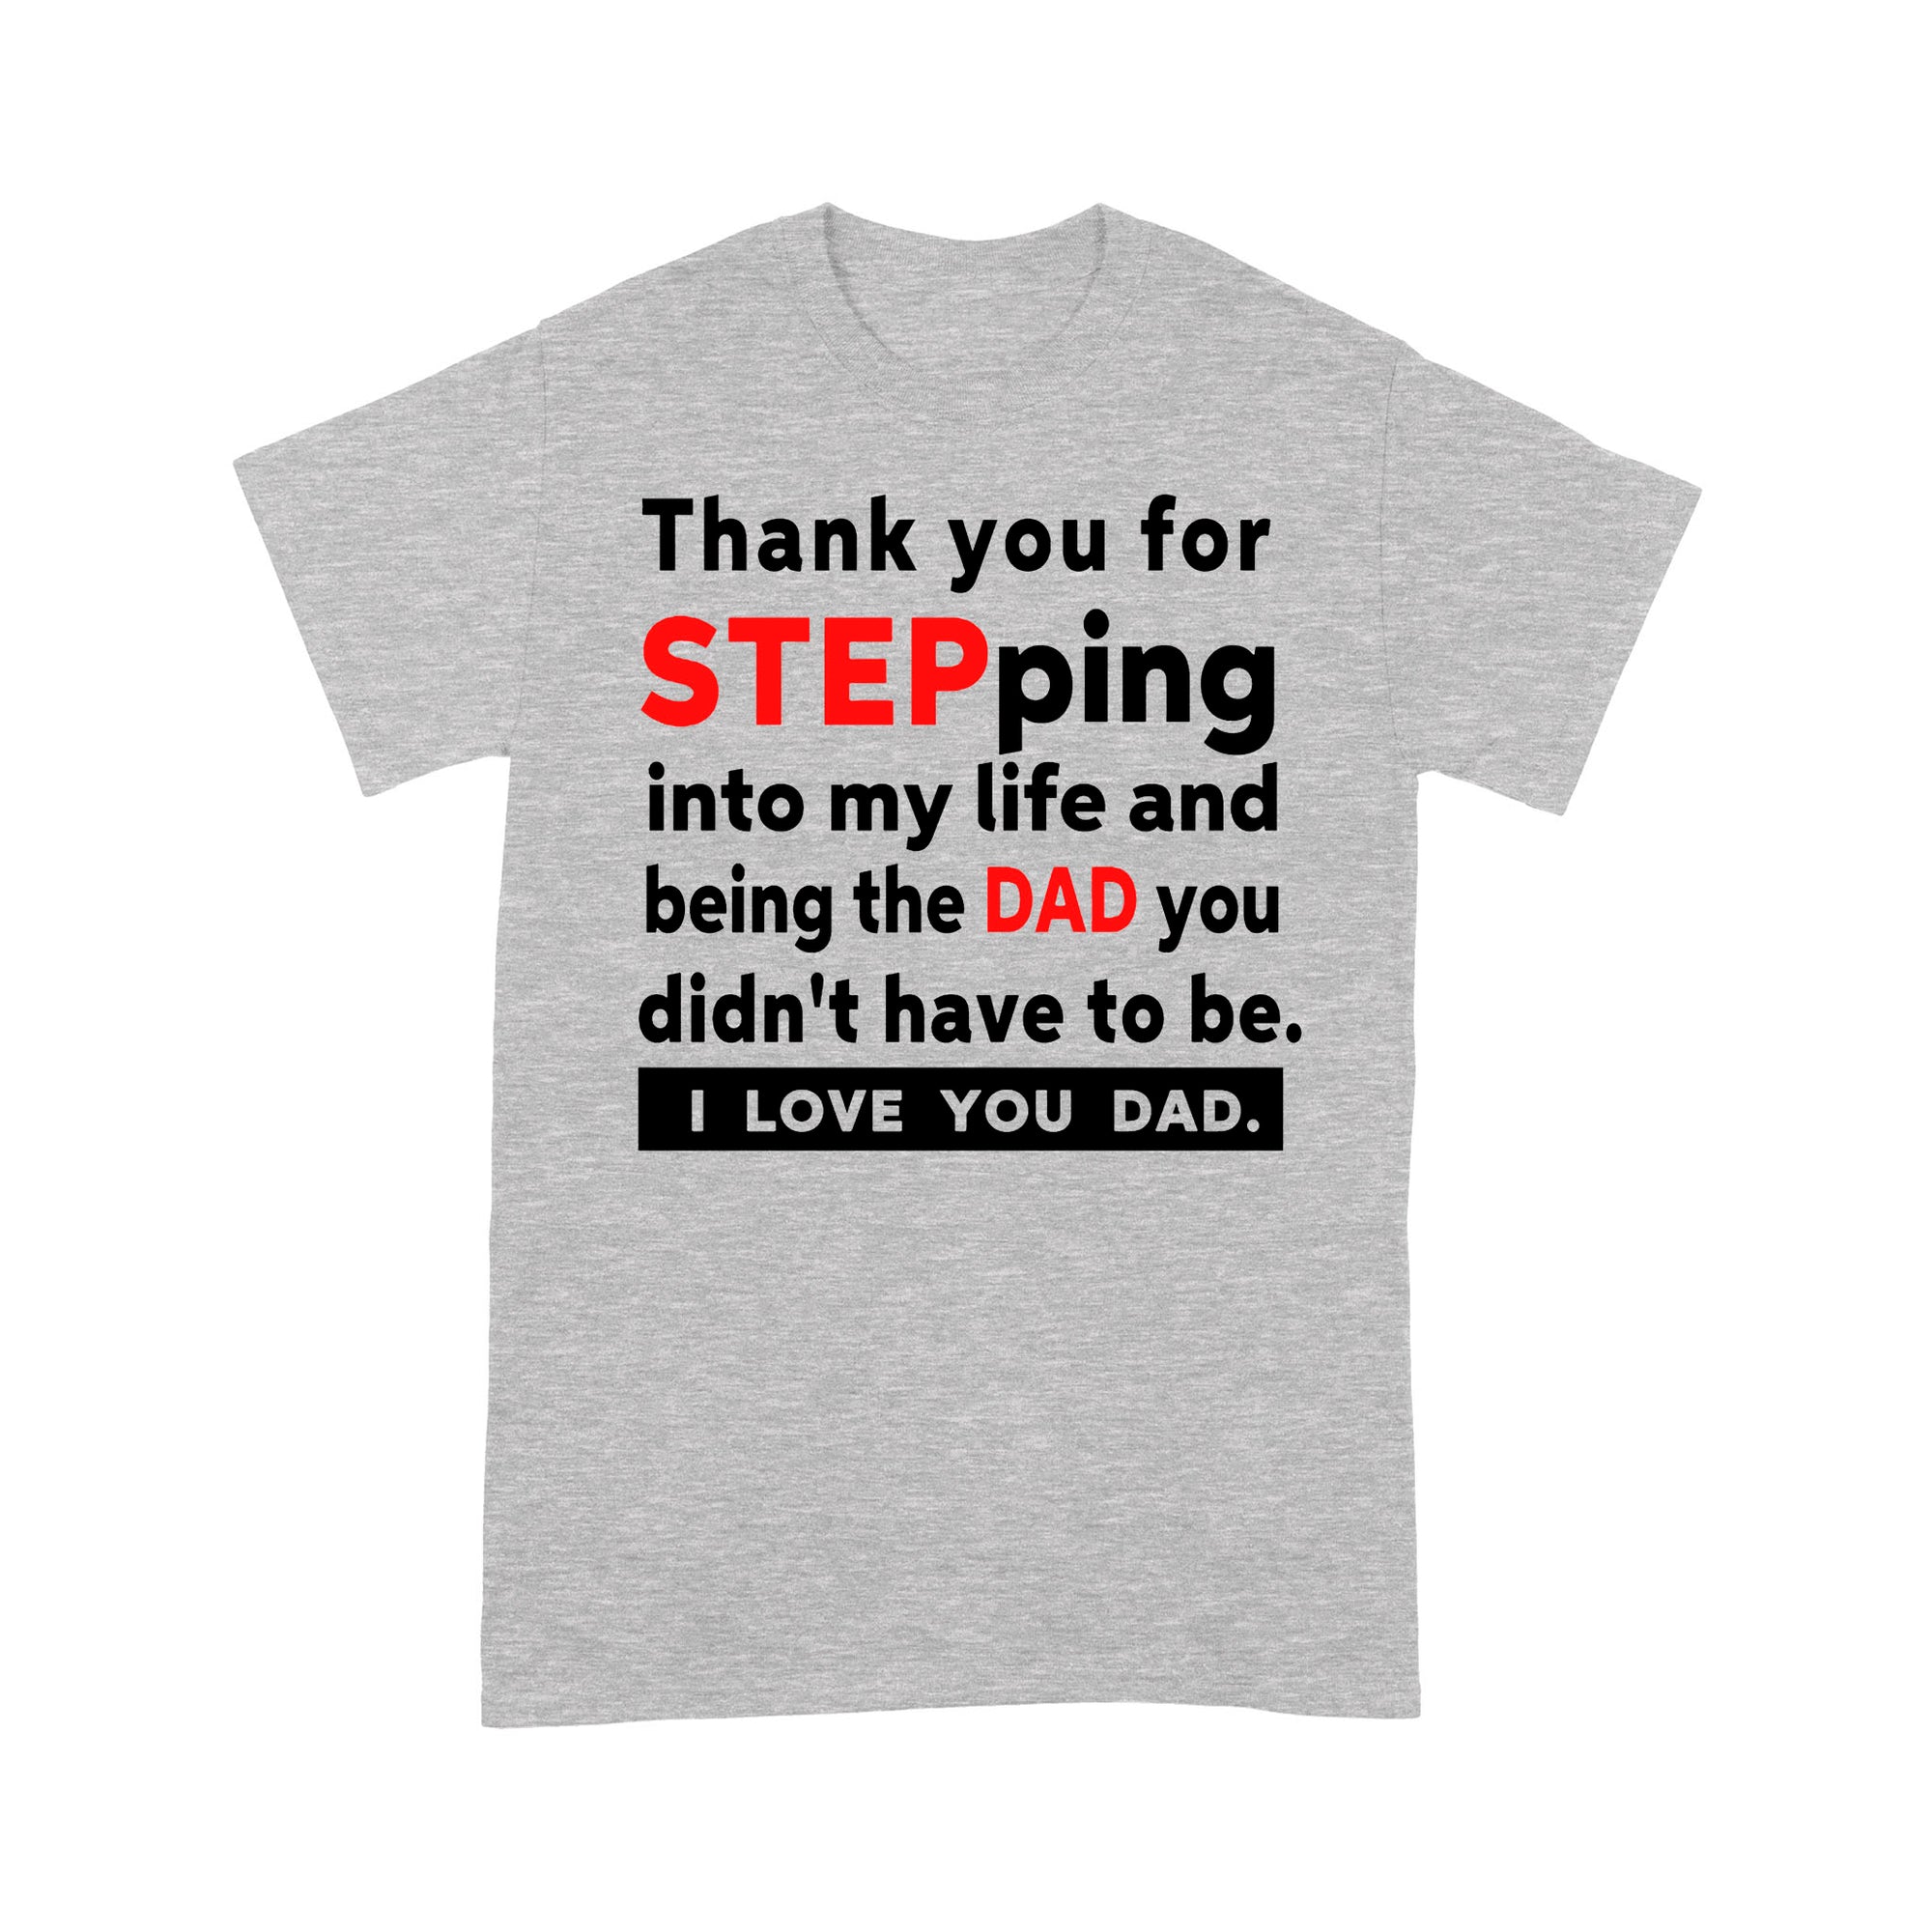 Gift Ideas for Dad Thank You For Stepping Into My Life And Being the Dad You Didn't Have To Be I Love You Dad (W) - Standard T-shirt